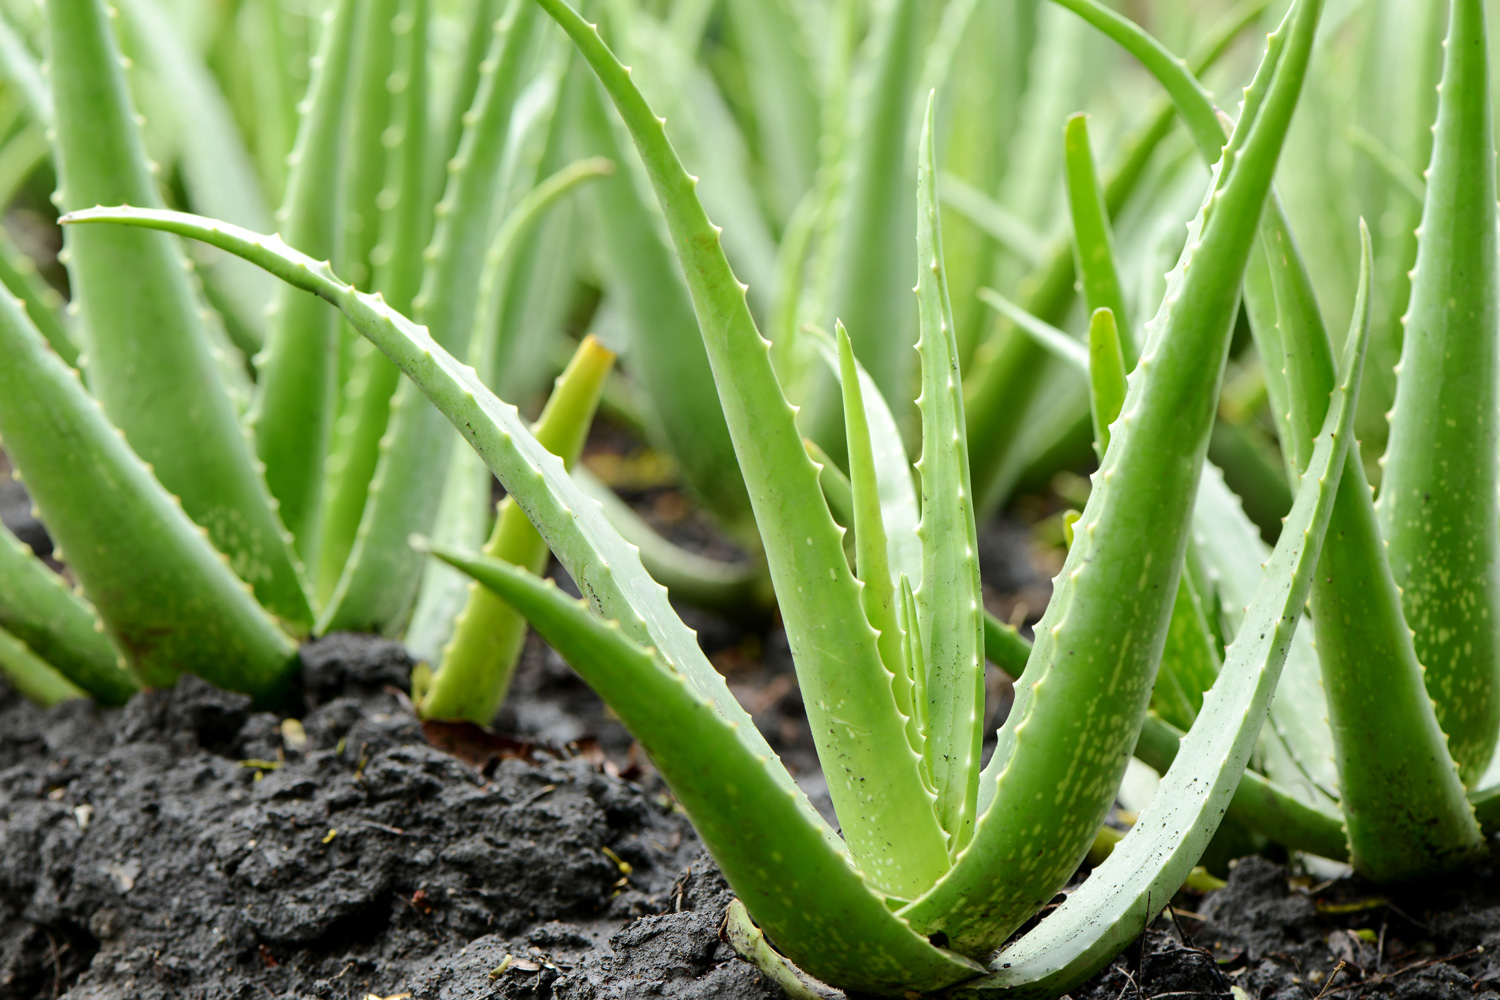 Group of Aloe Vera Plant growth in farmMore Aloe Vera image, Aloe Vera Plant growth in farm